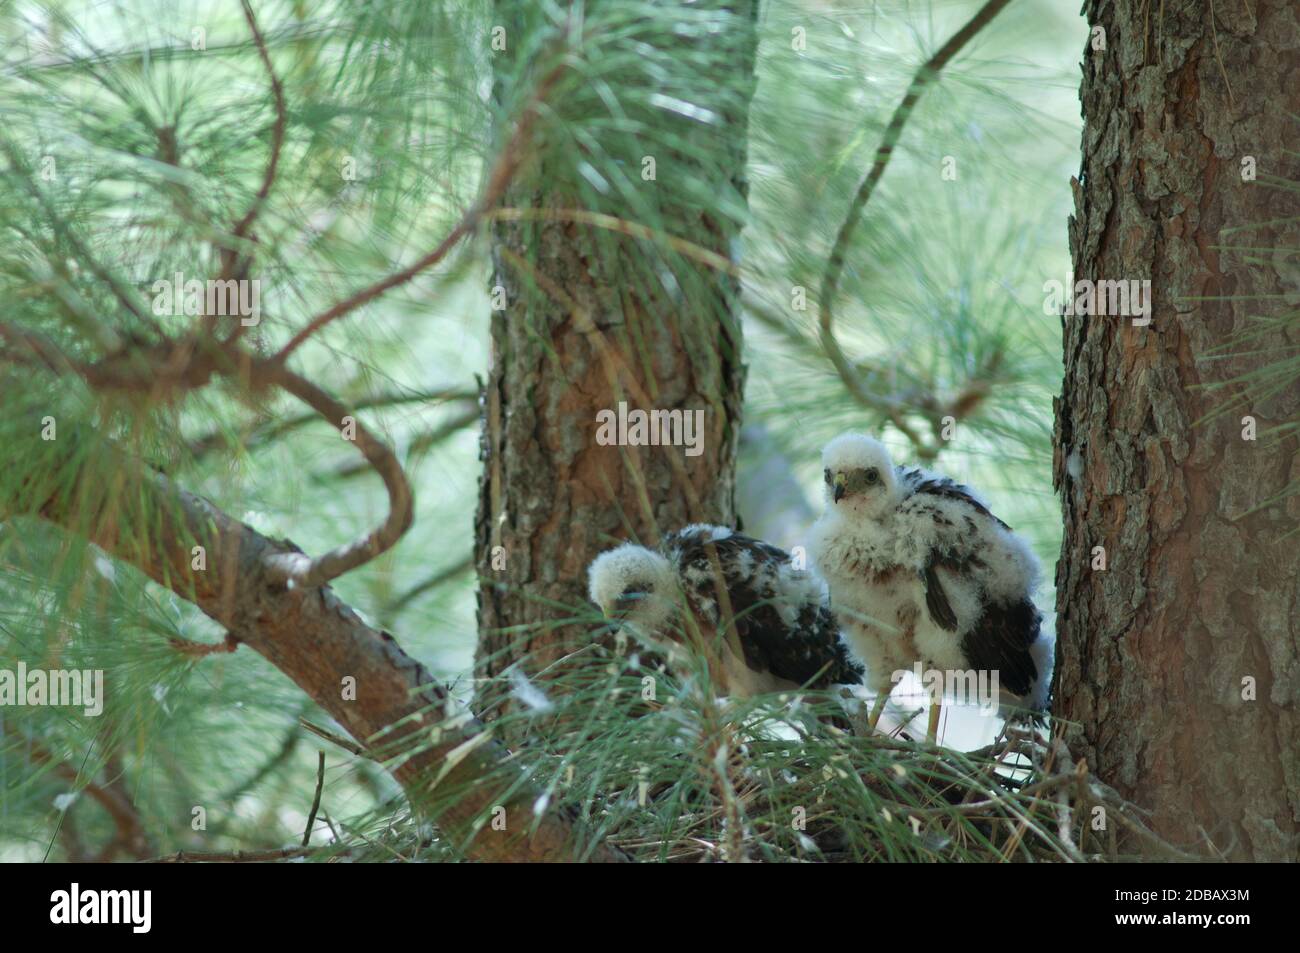 Chicks of Eurasian sparrowhawk Accipiter nisus granti in the nest. Integral Natural Reserve of Inagua. Gran Canaria. Canary Islands. Spain. Stock Photo